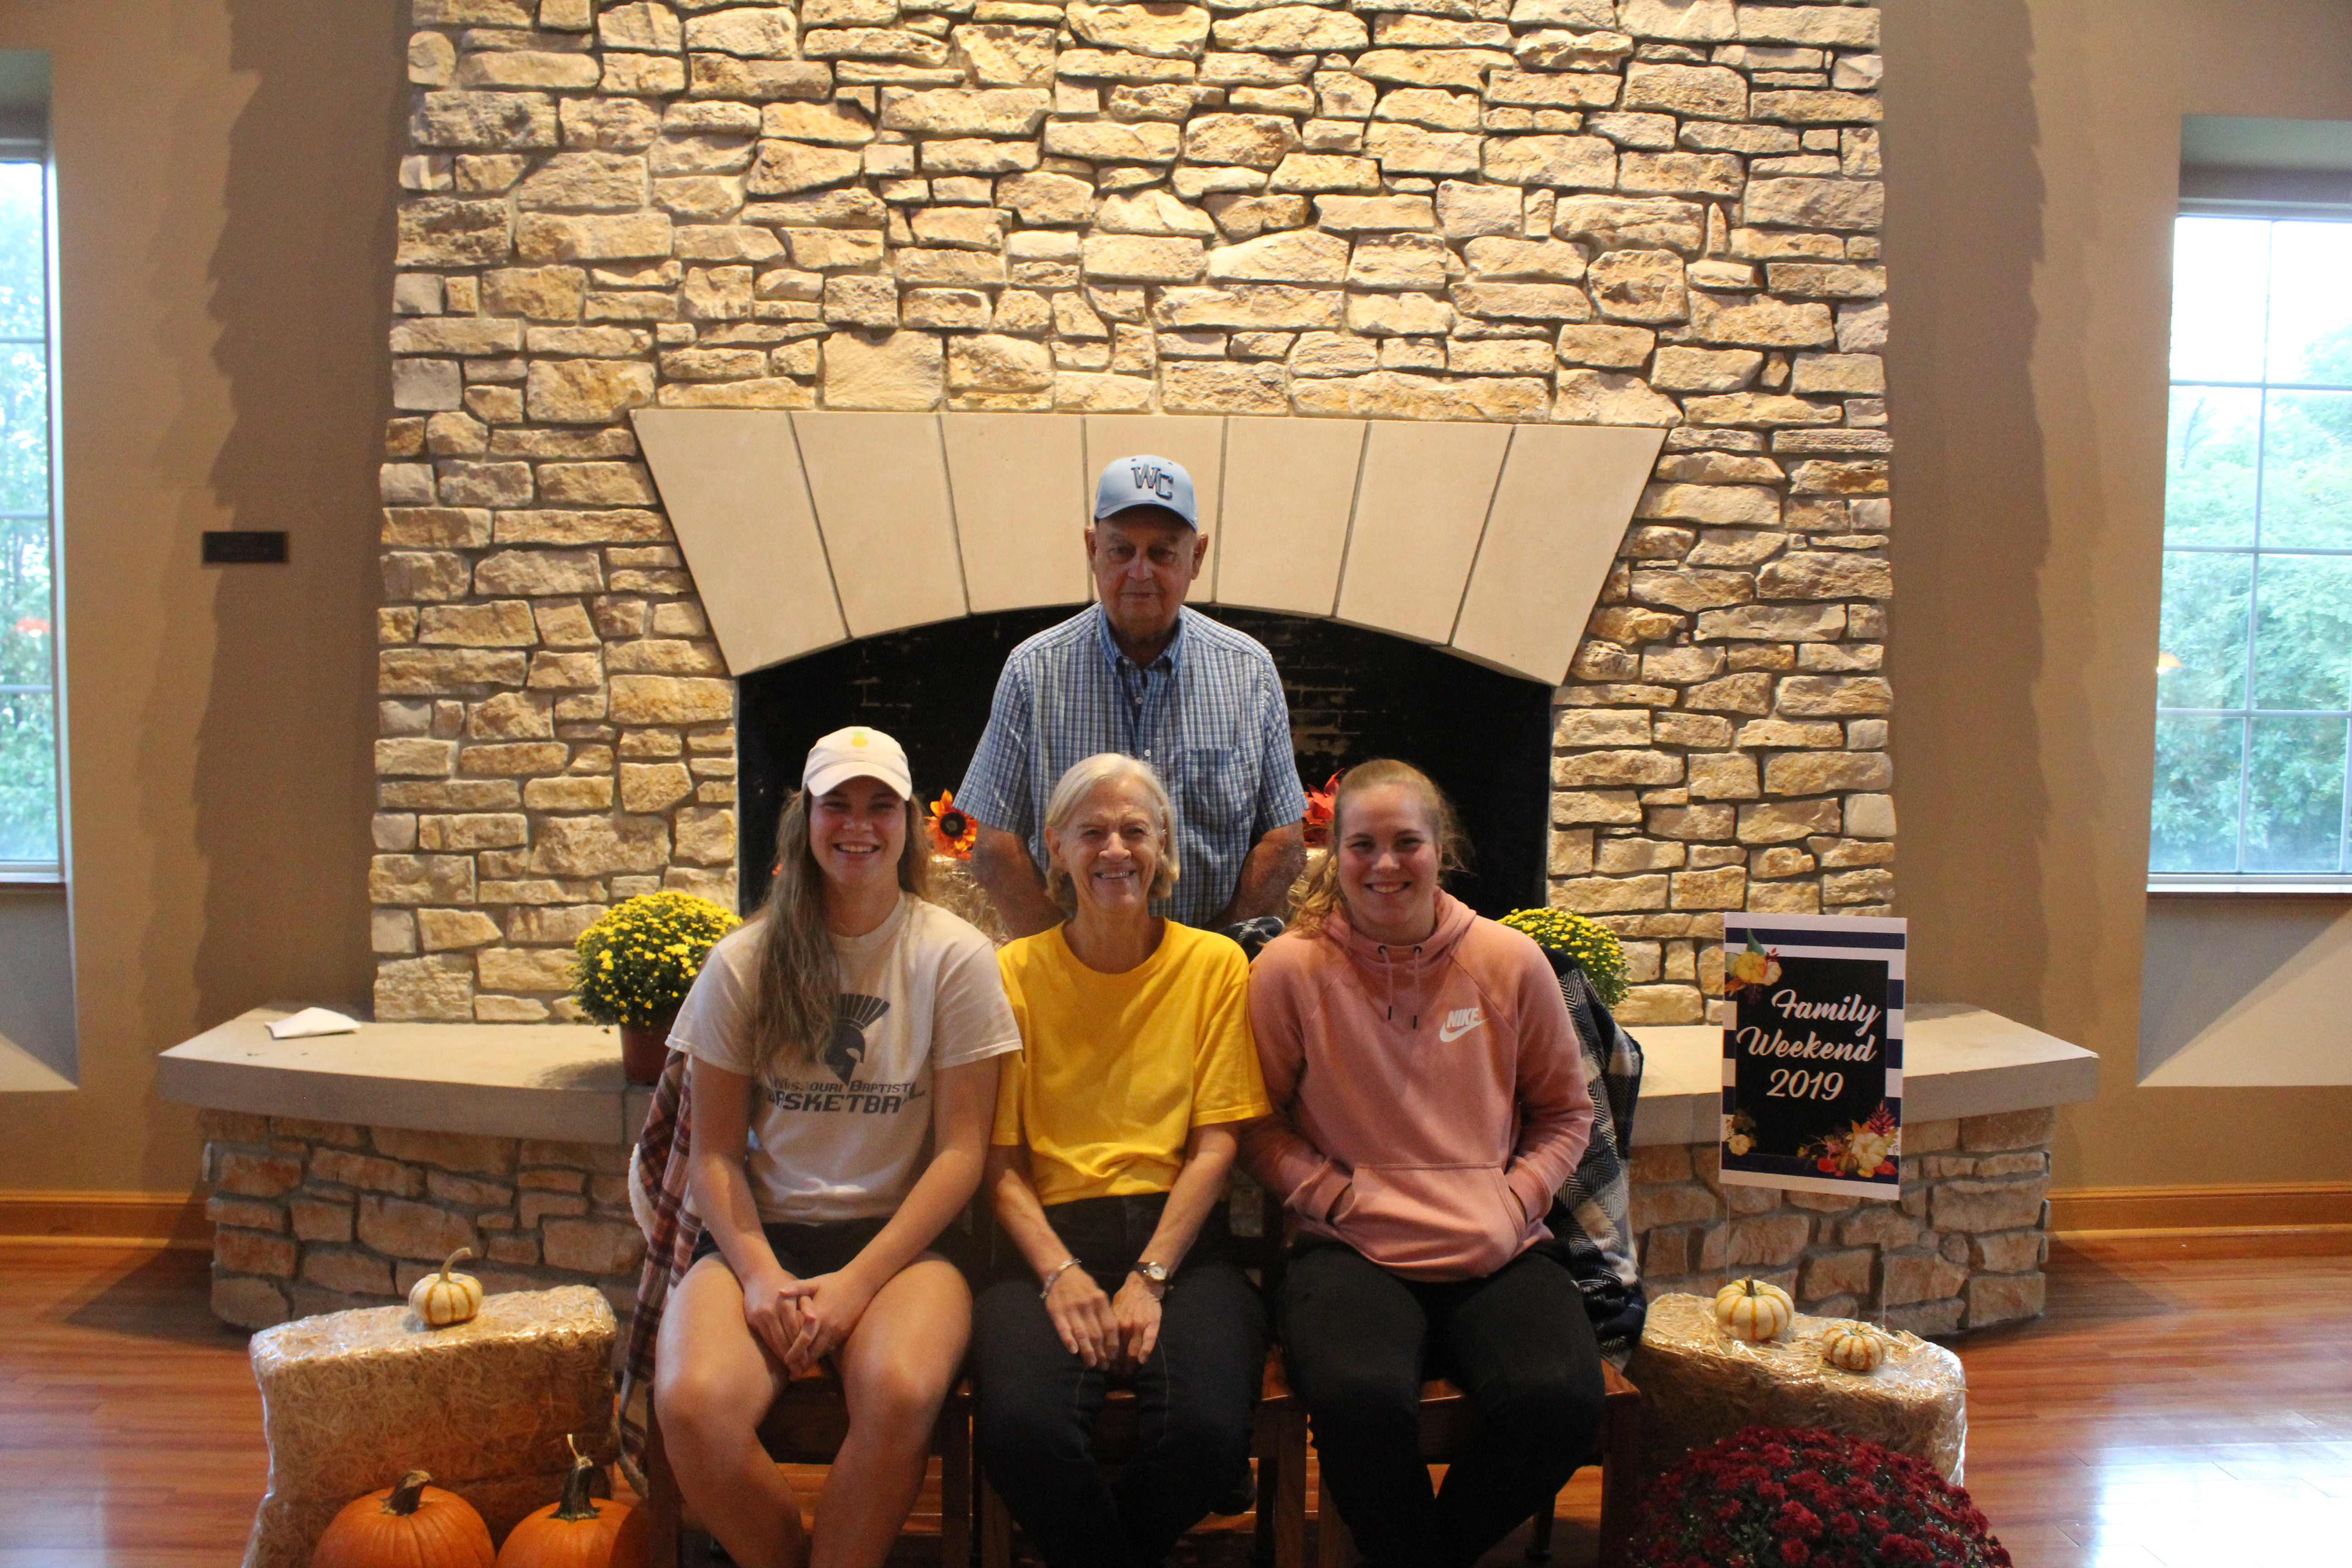 Two parents pose for a picture with two female Westminster College students during Family Weekend.